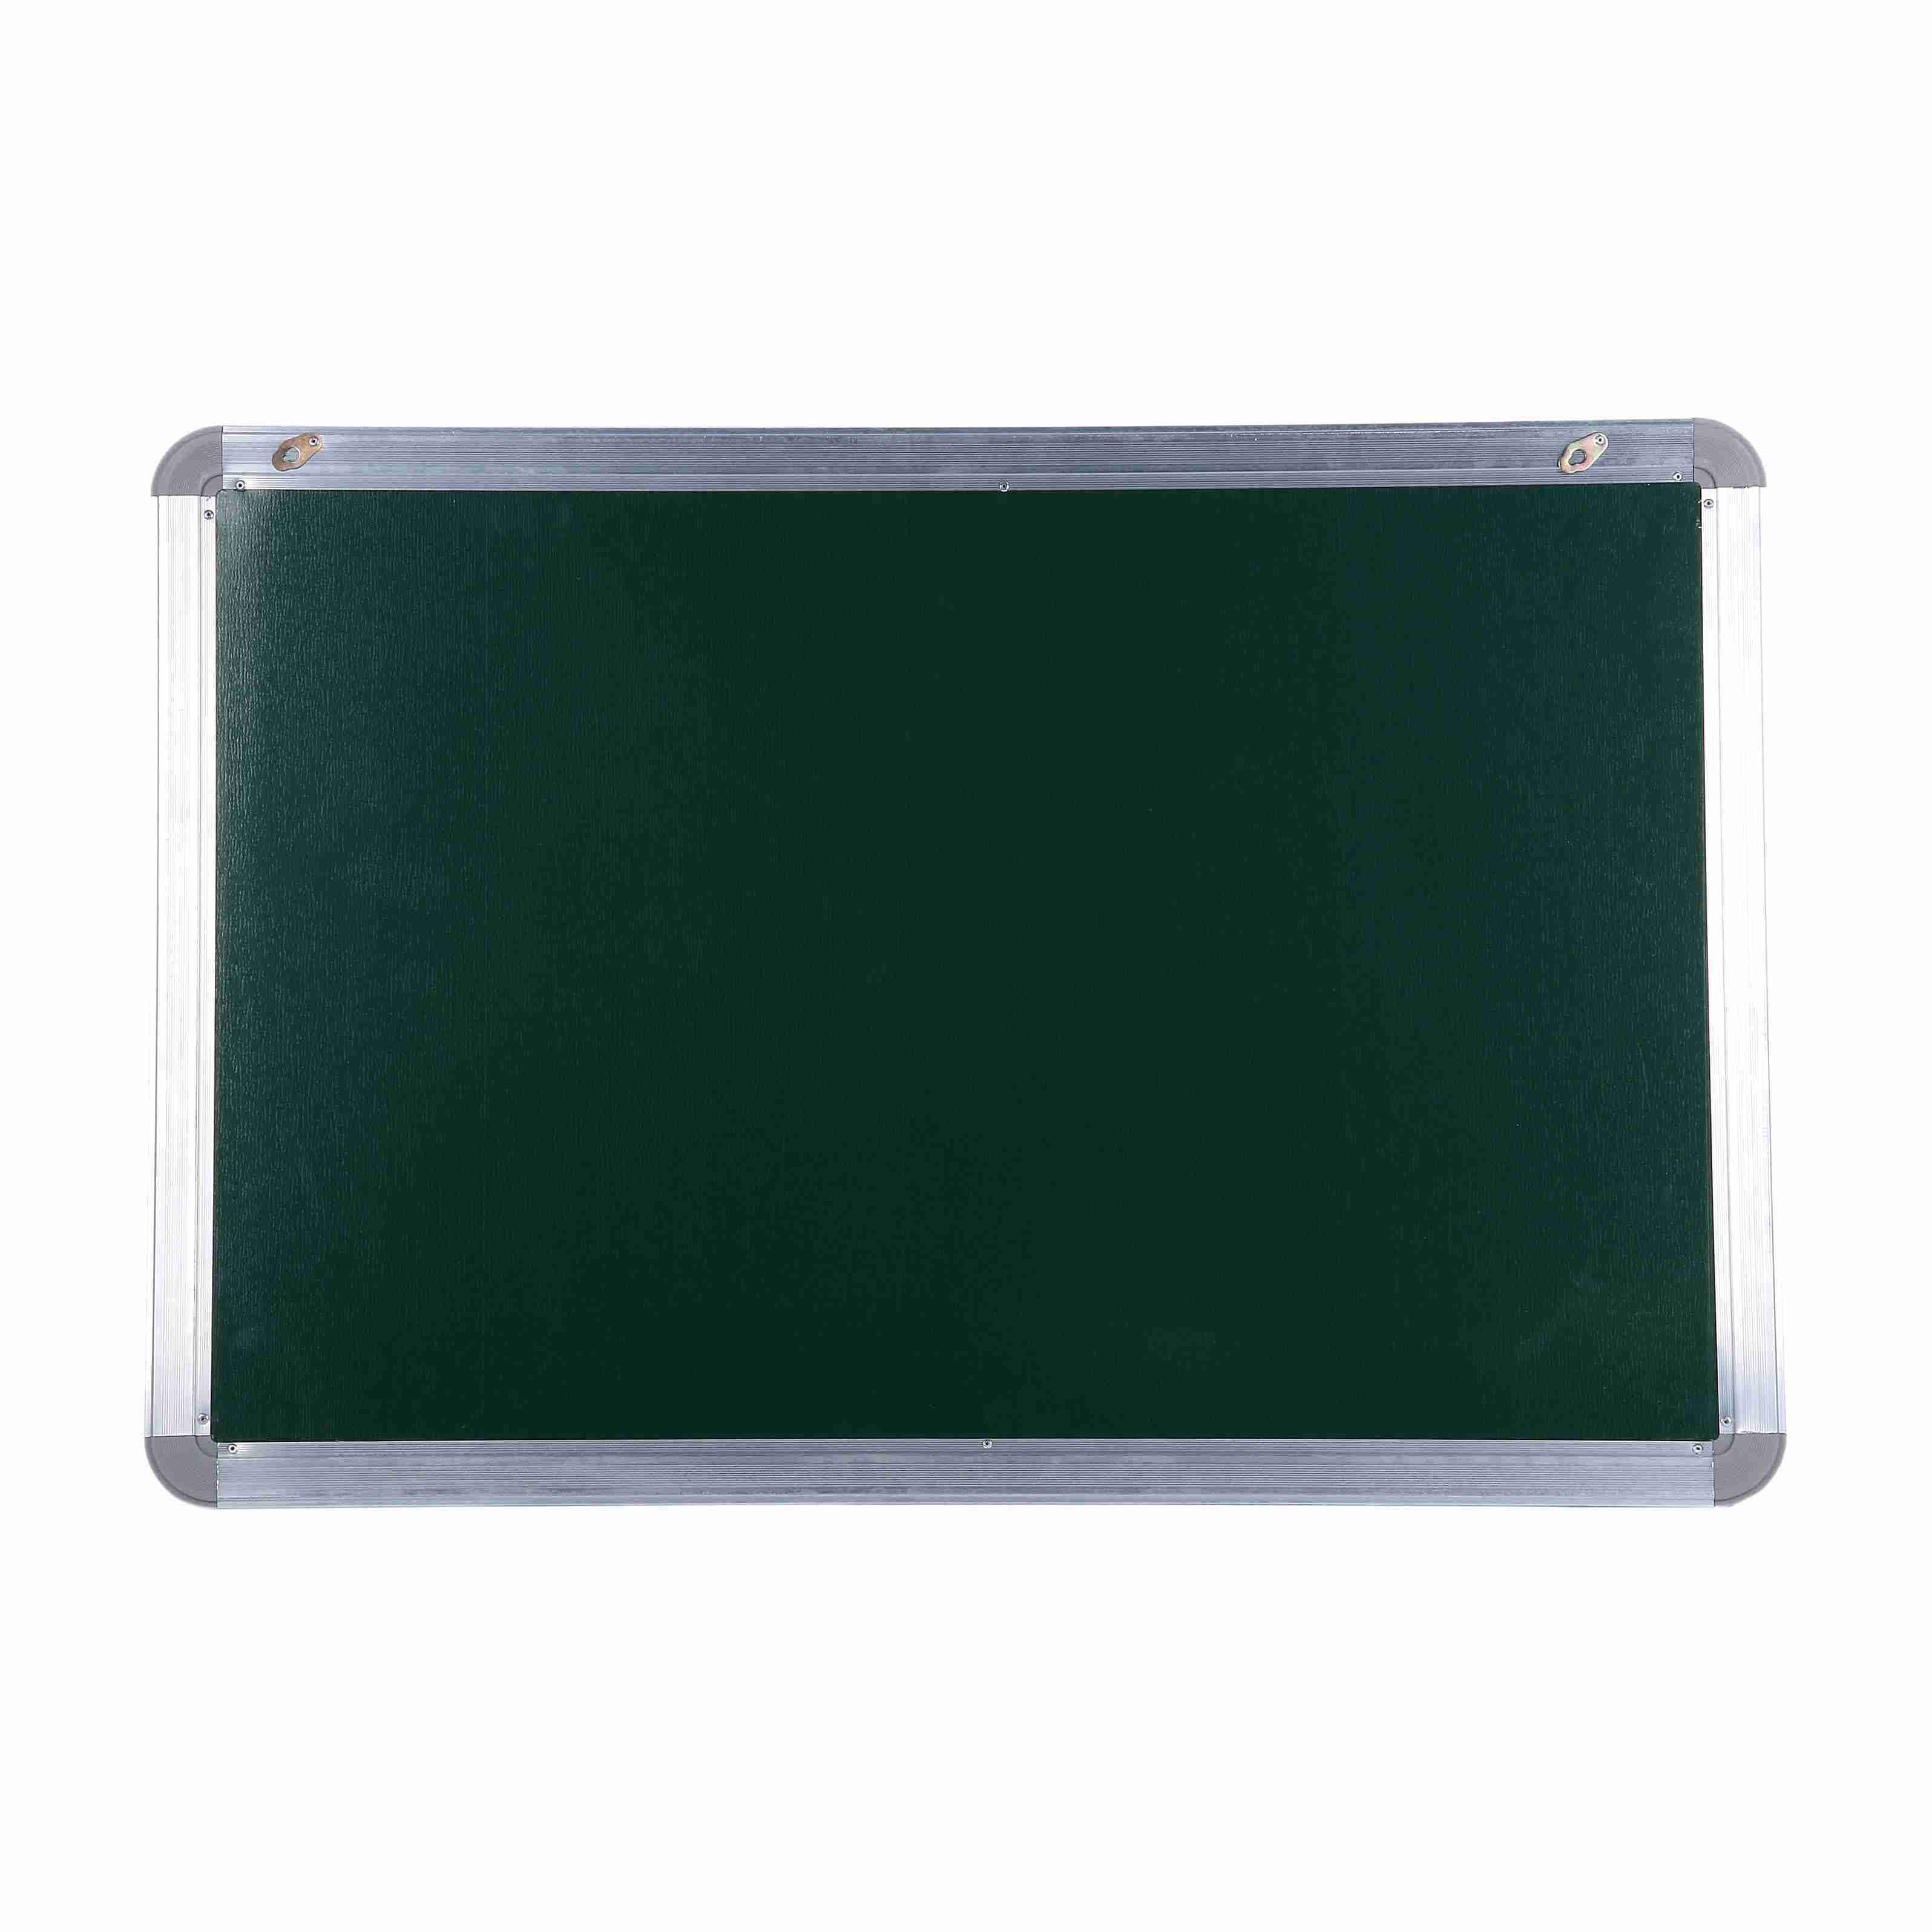 Magnetic Dry Erase Classroom Greenboard